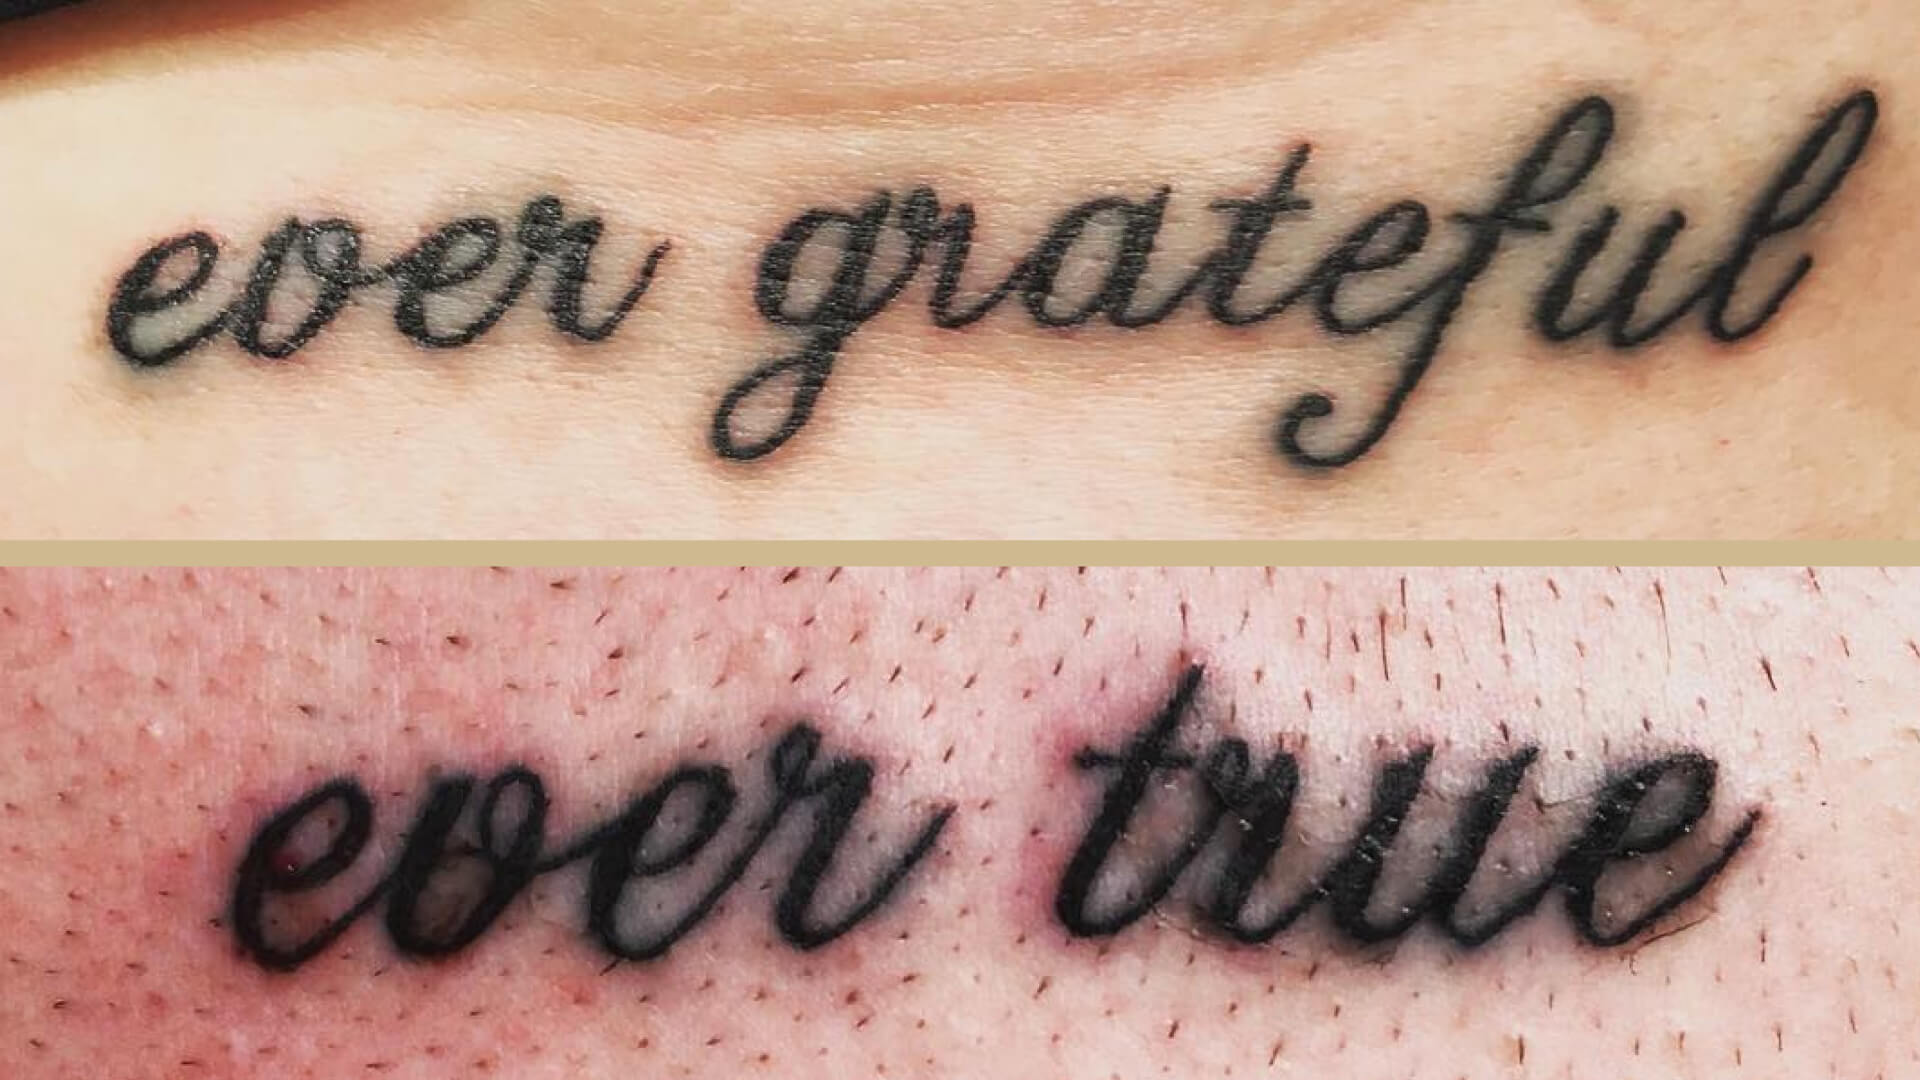 Grateful lettering tattoo on the tricep